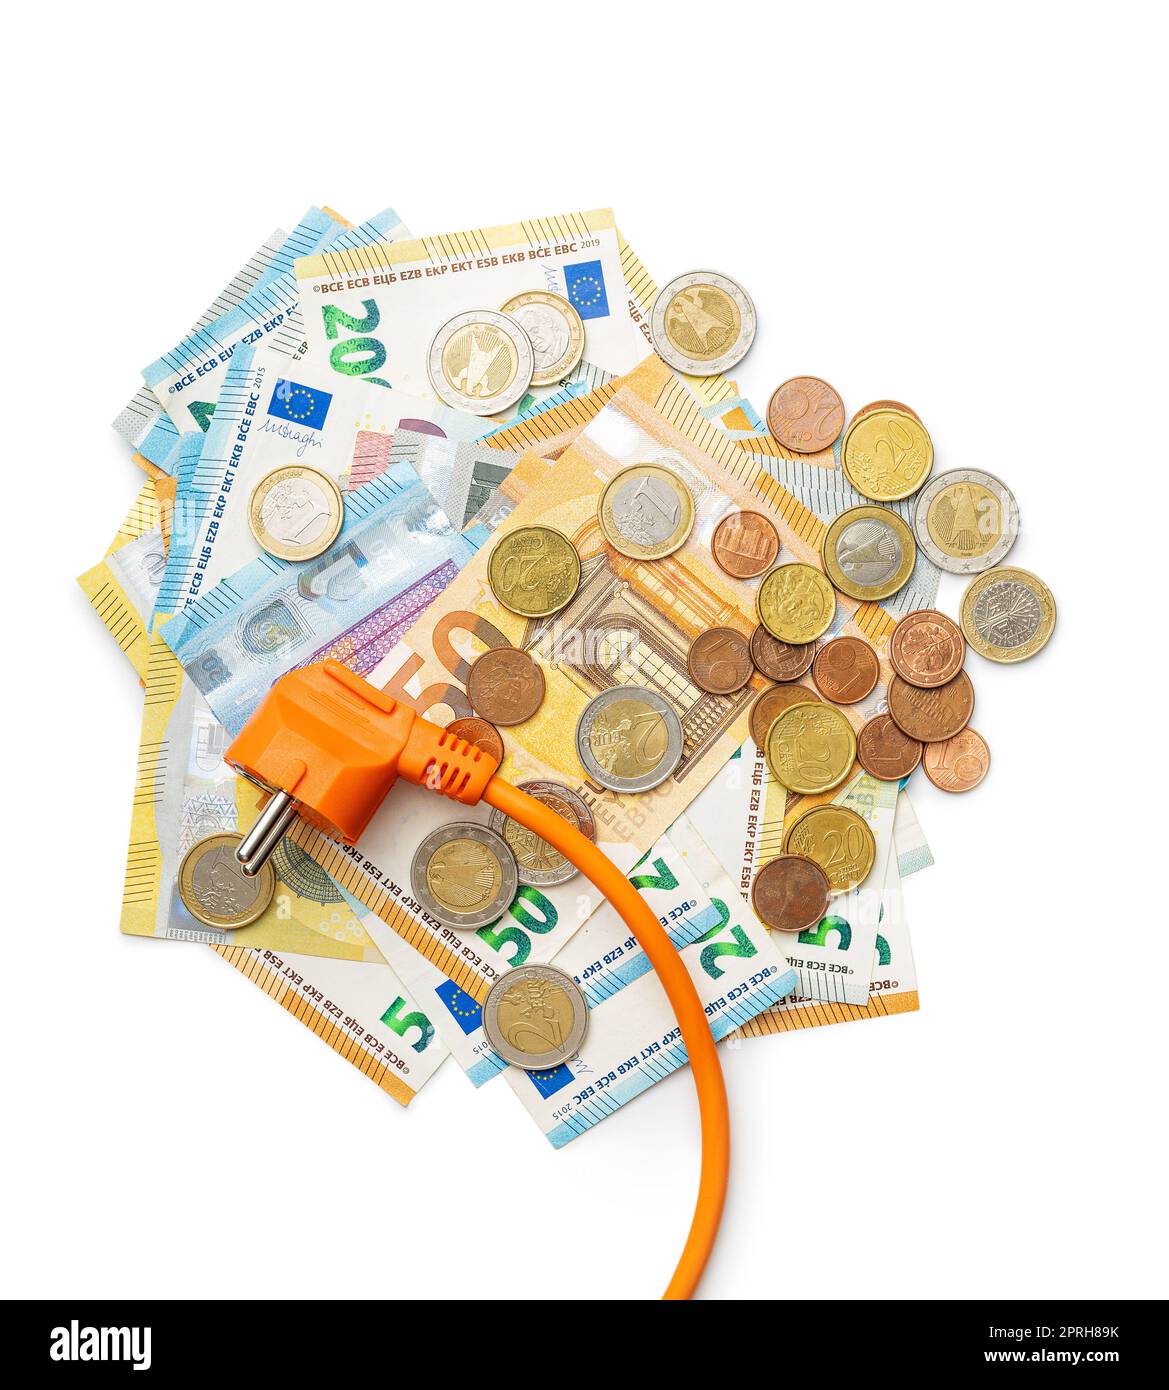 Electric plug and euro money isolated on white background. Concept of increasing electricity prices. Stock Photo